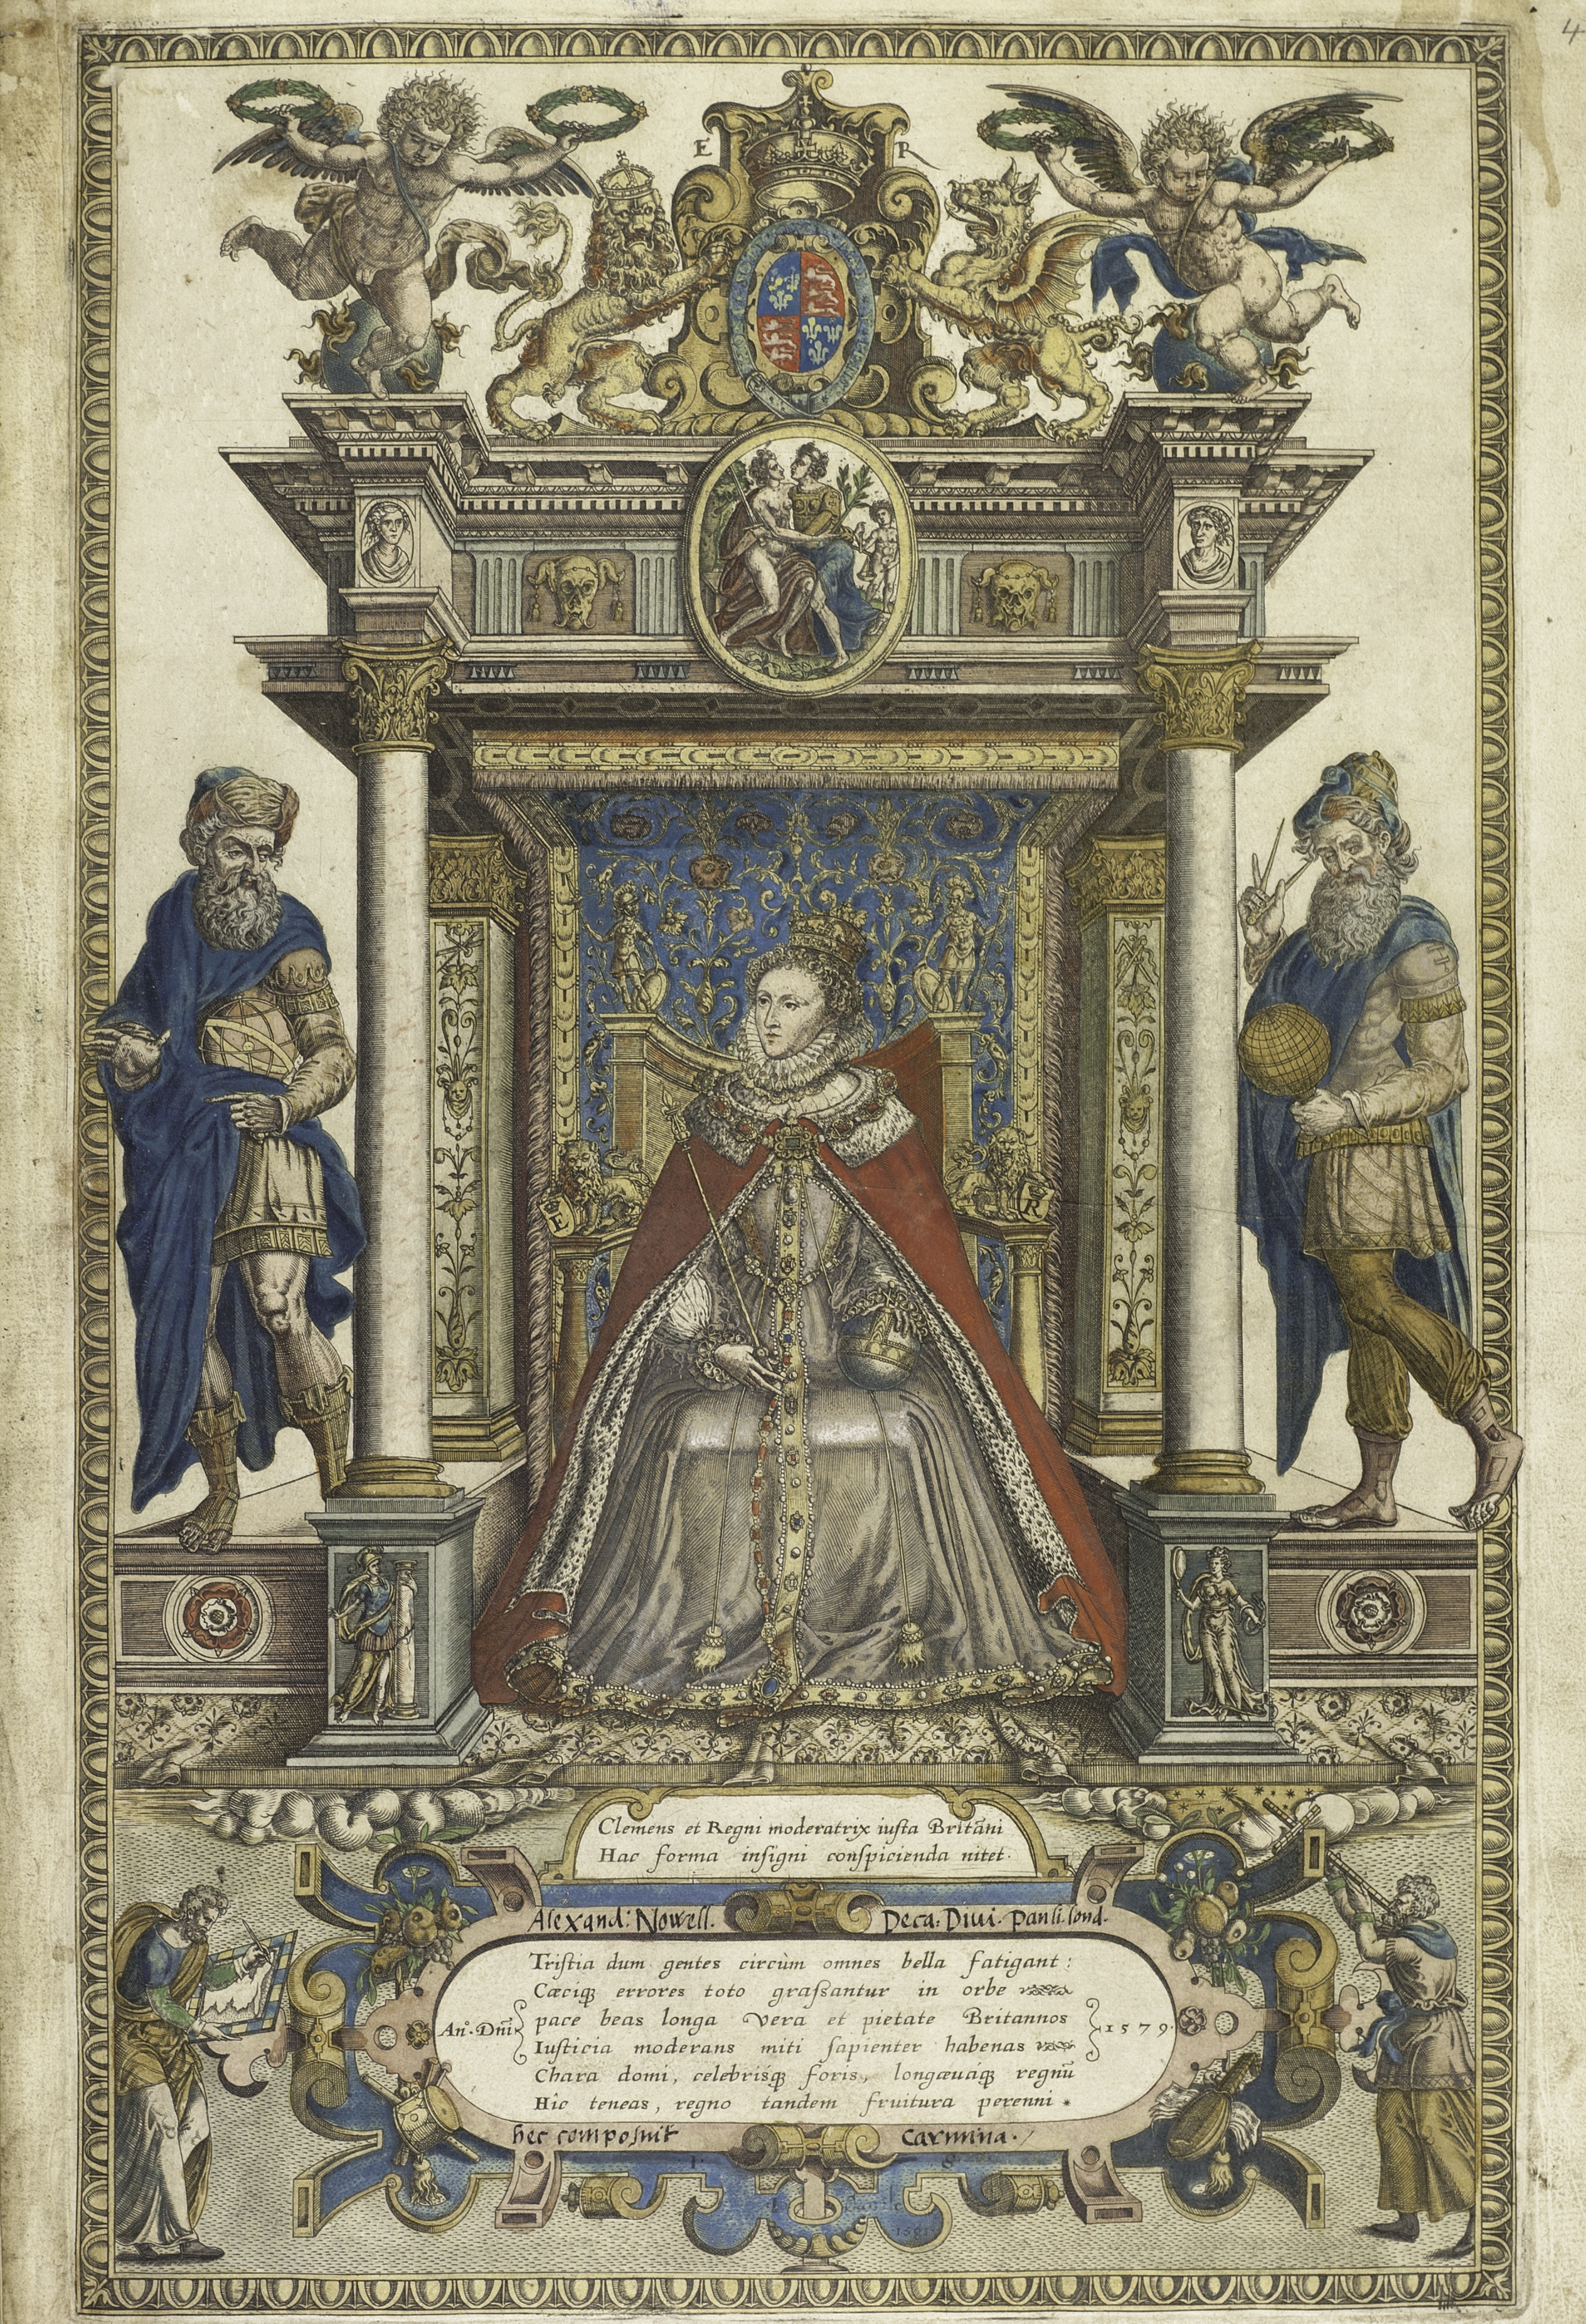 BT1.47.9, frontispiece, Christopher Saxton’s Atlas of the counties of England and Wales (1579)